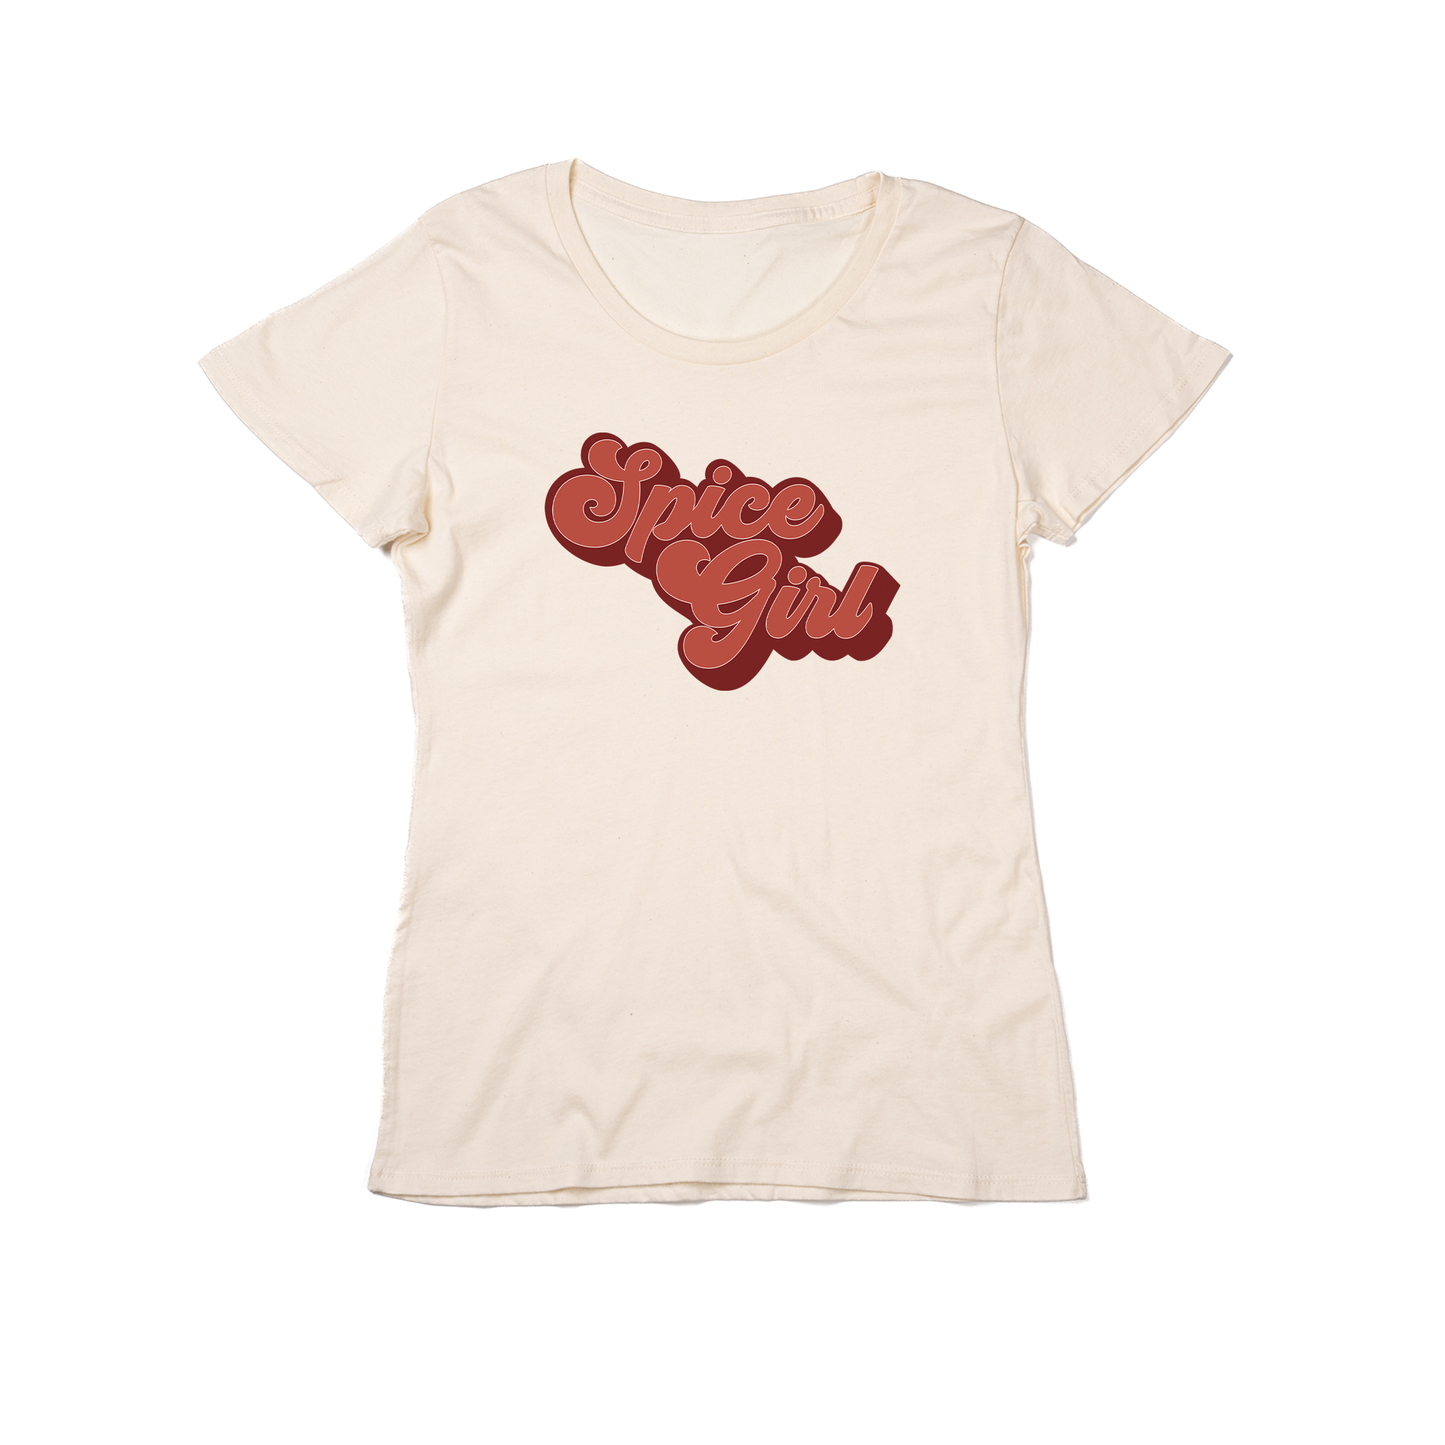 Spice Girl (Retro) - Women's Fitted Tee (Natural)